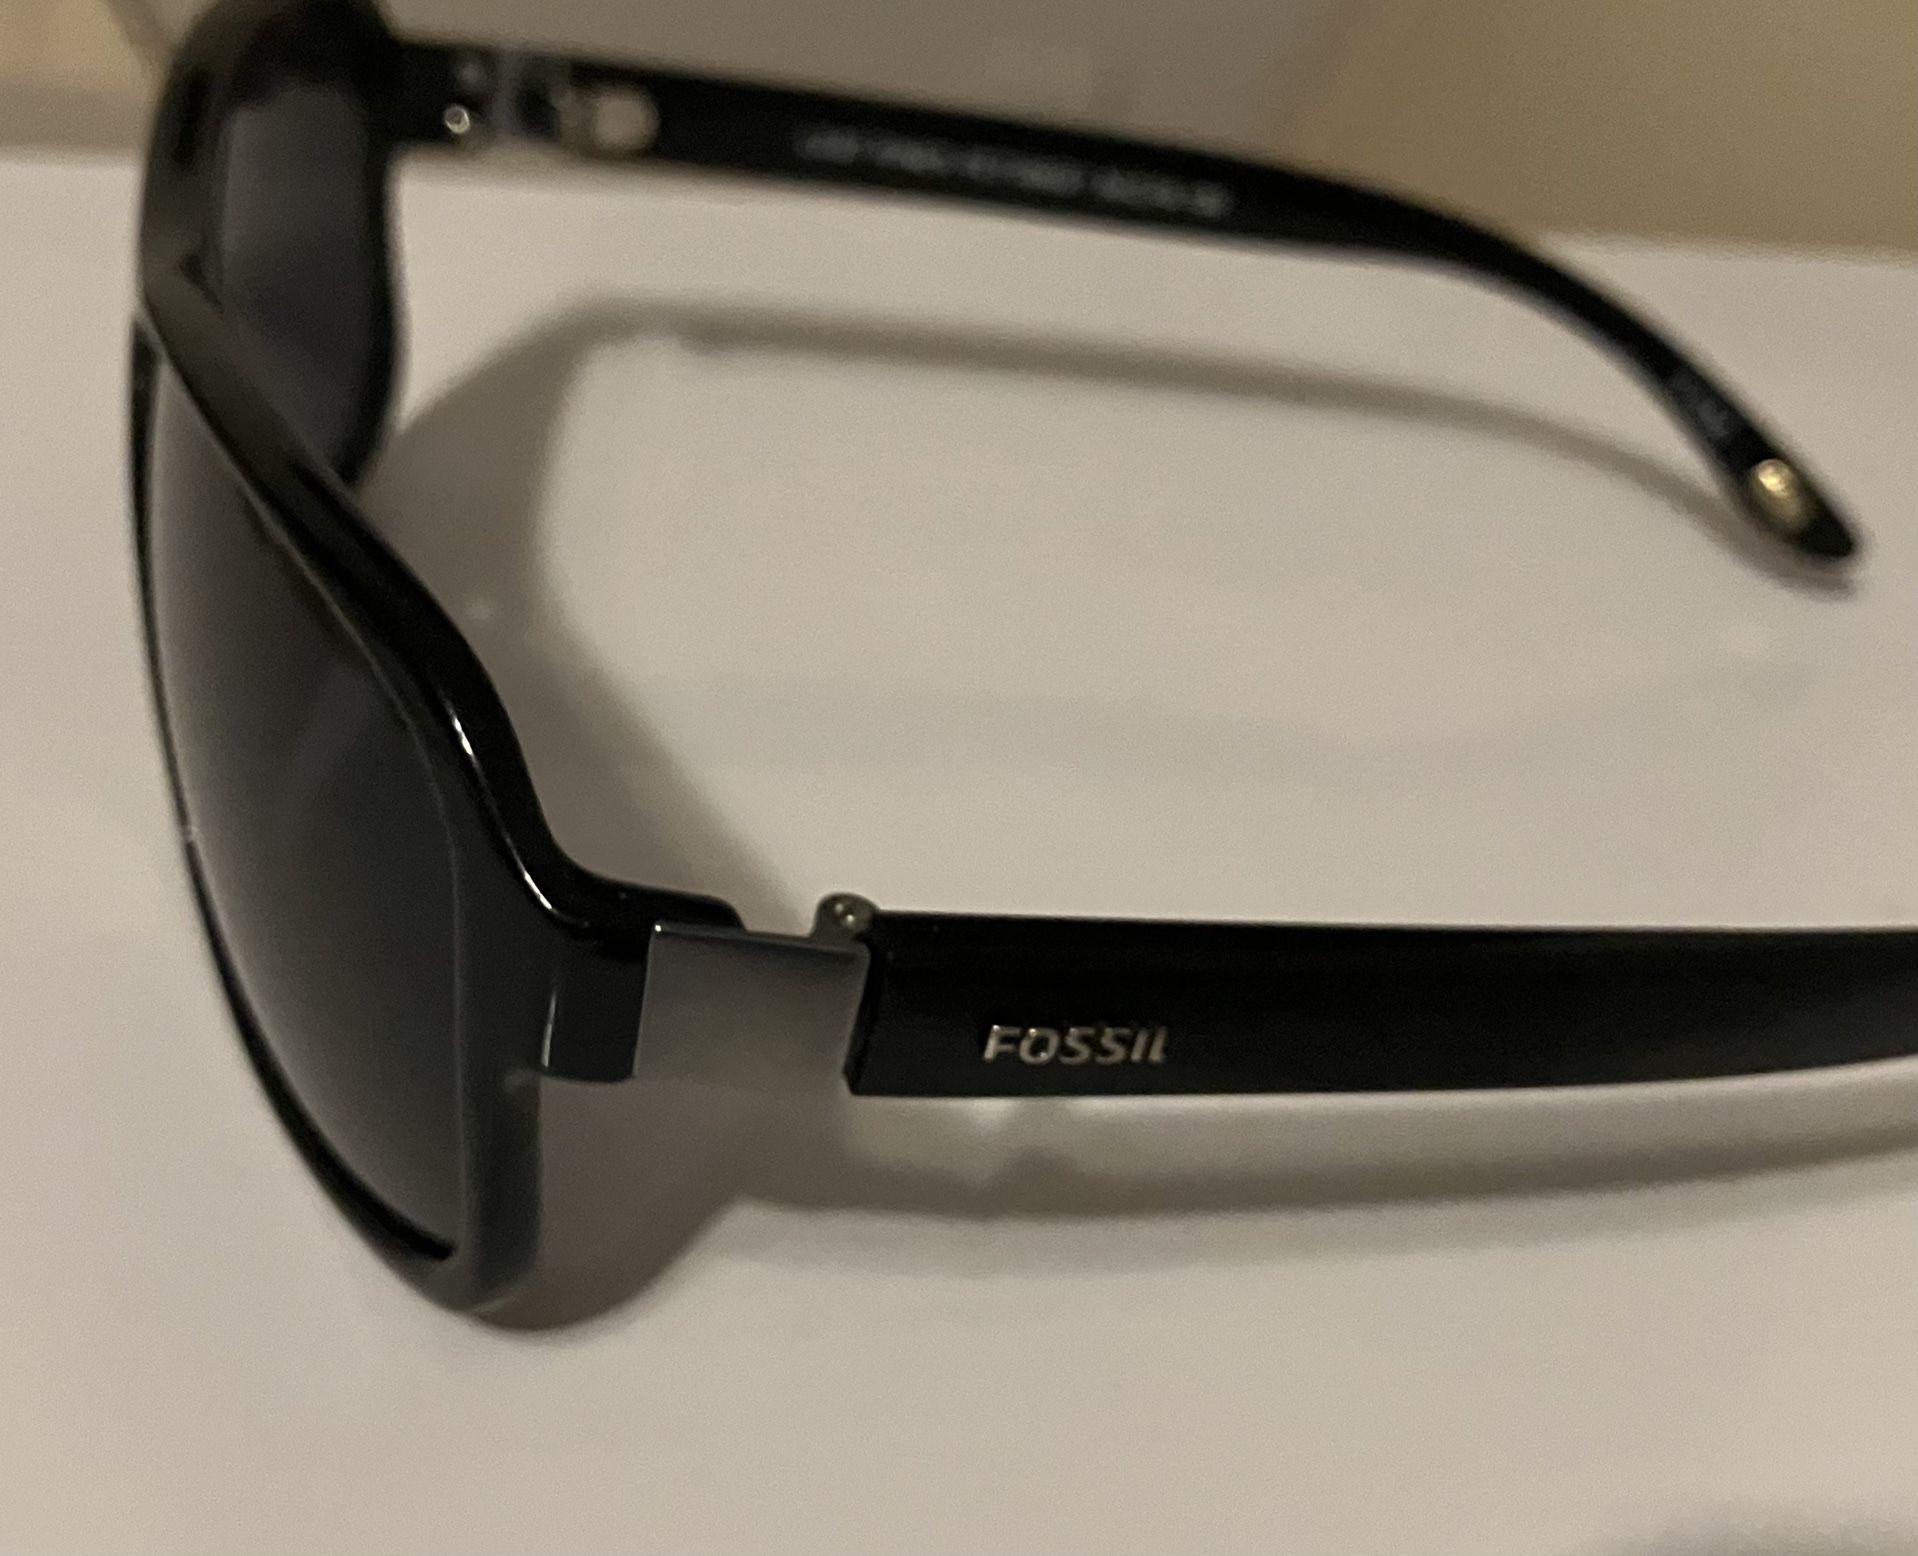 Fossil Sunglasses - Like New Condition